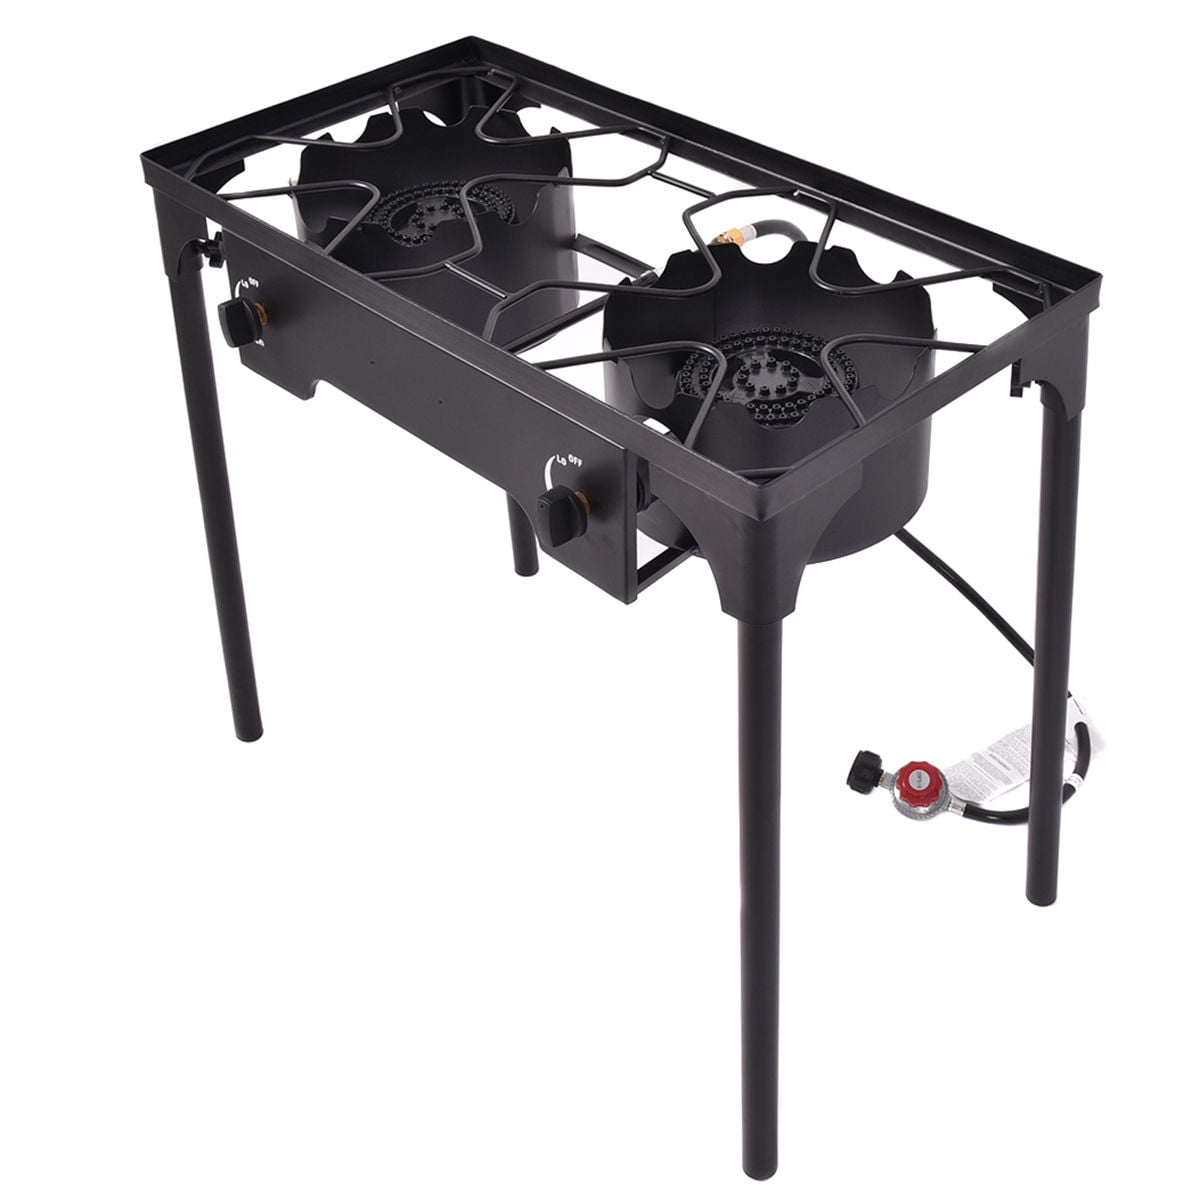 31''H STAND ONLY Portable Propane Gas Stove Burner Fryer Outdoor Camping 